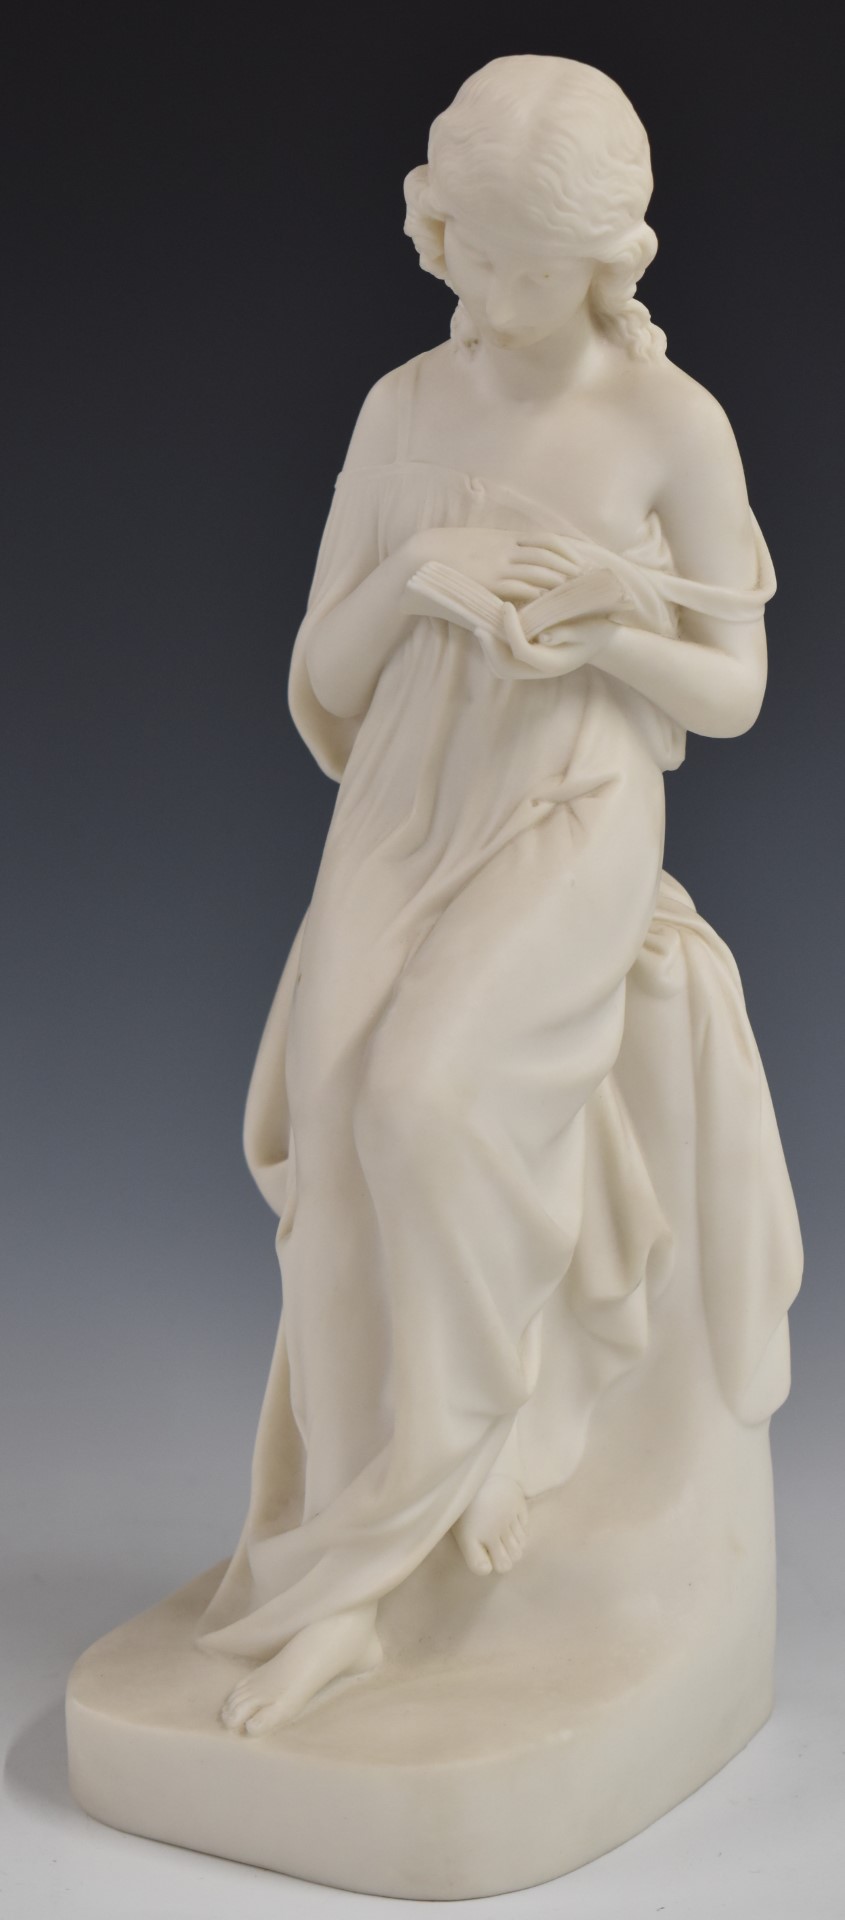 Copeland Parianware figurine of 'The Reading Girl' after P Macdowell RA for the Ceramic and